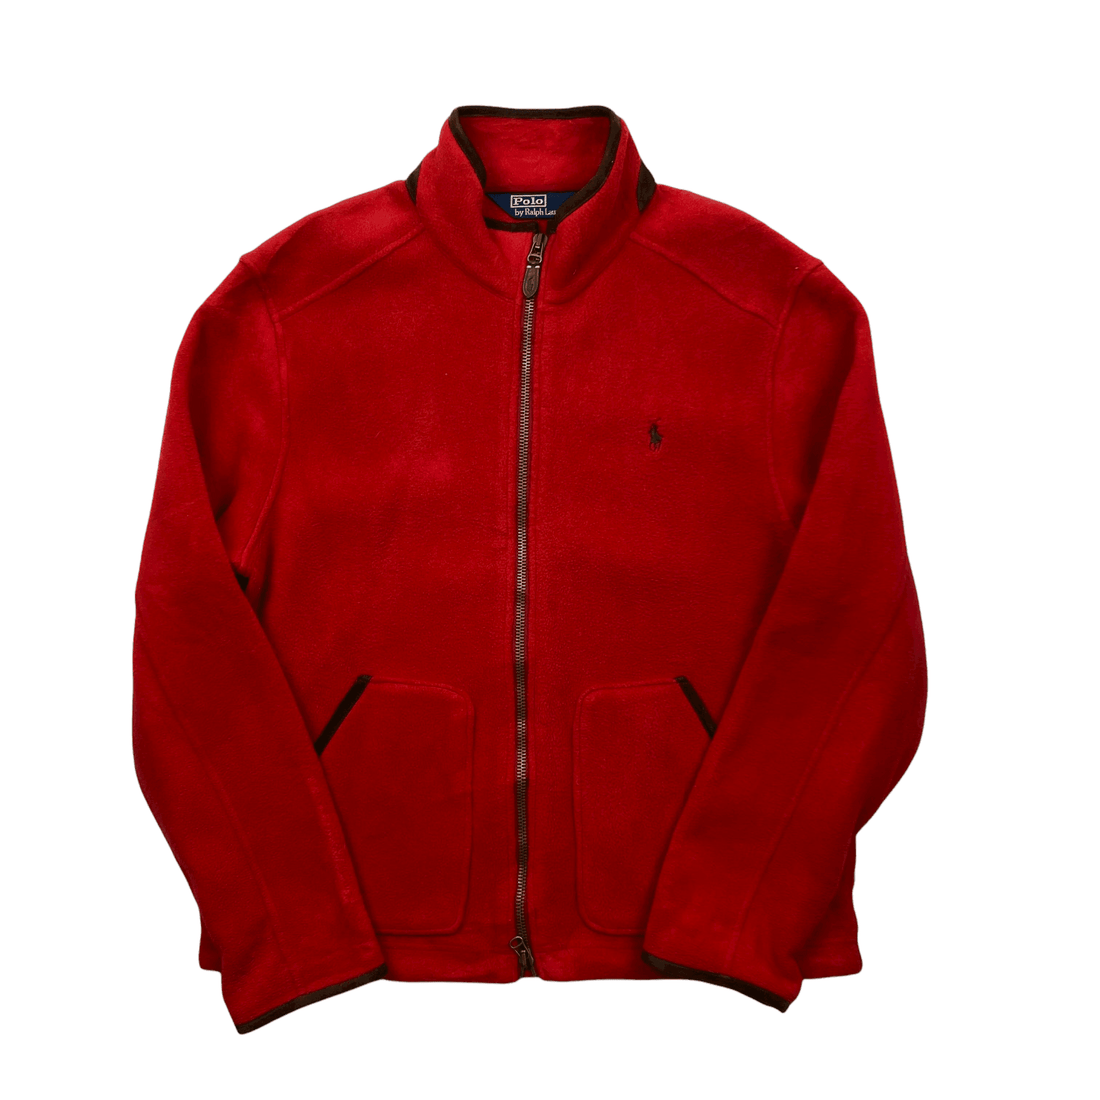 Vintage Red Polo Ralph Lauren Full Zip Fleece Jacket - Extra Large (Recommended Size - Large) - The Streetwear Studio